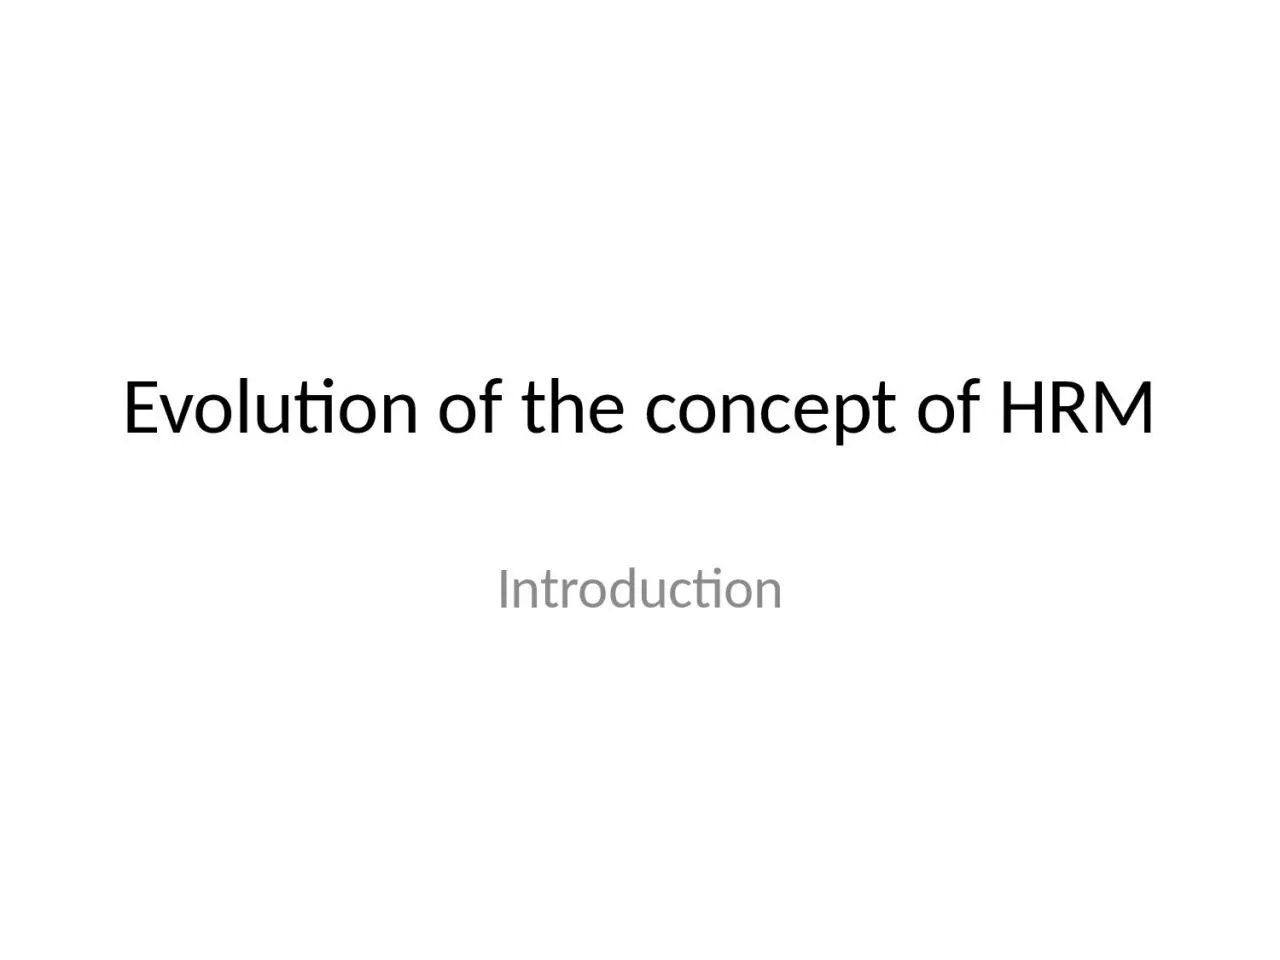 Evolution of the concept of HRM